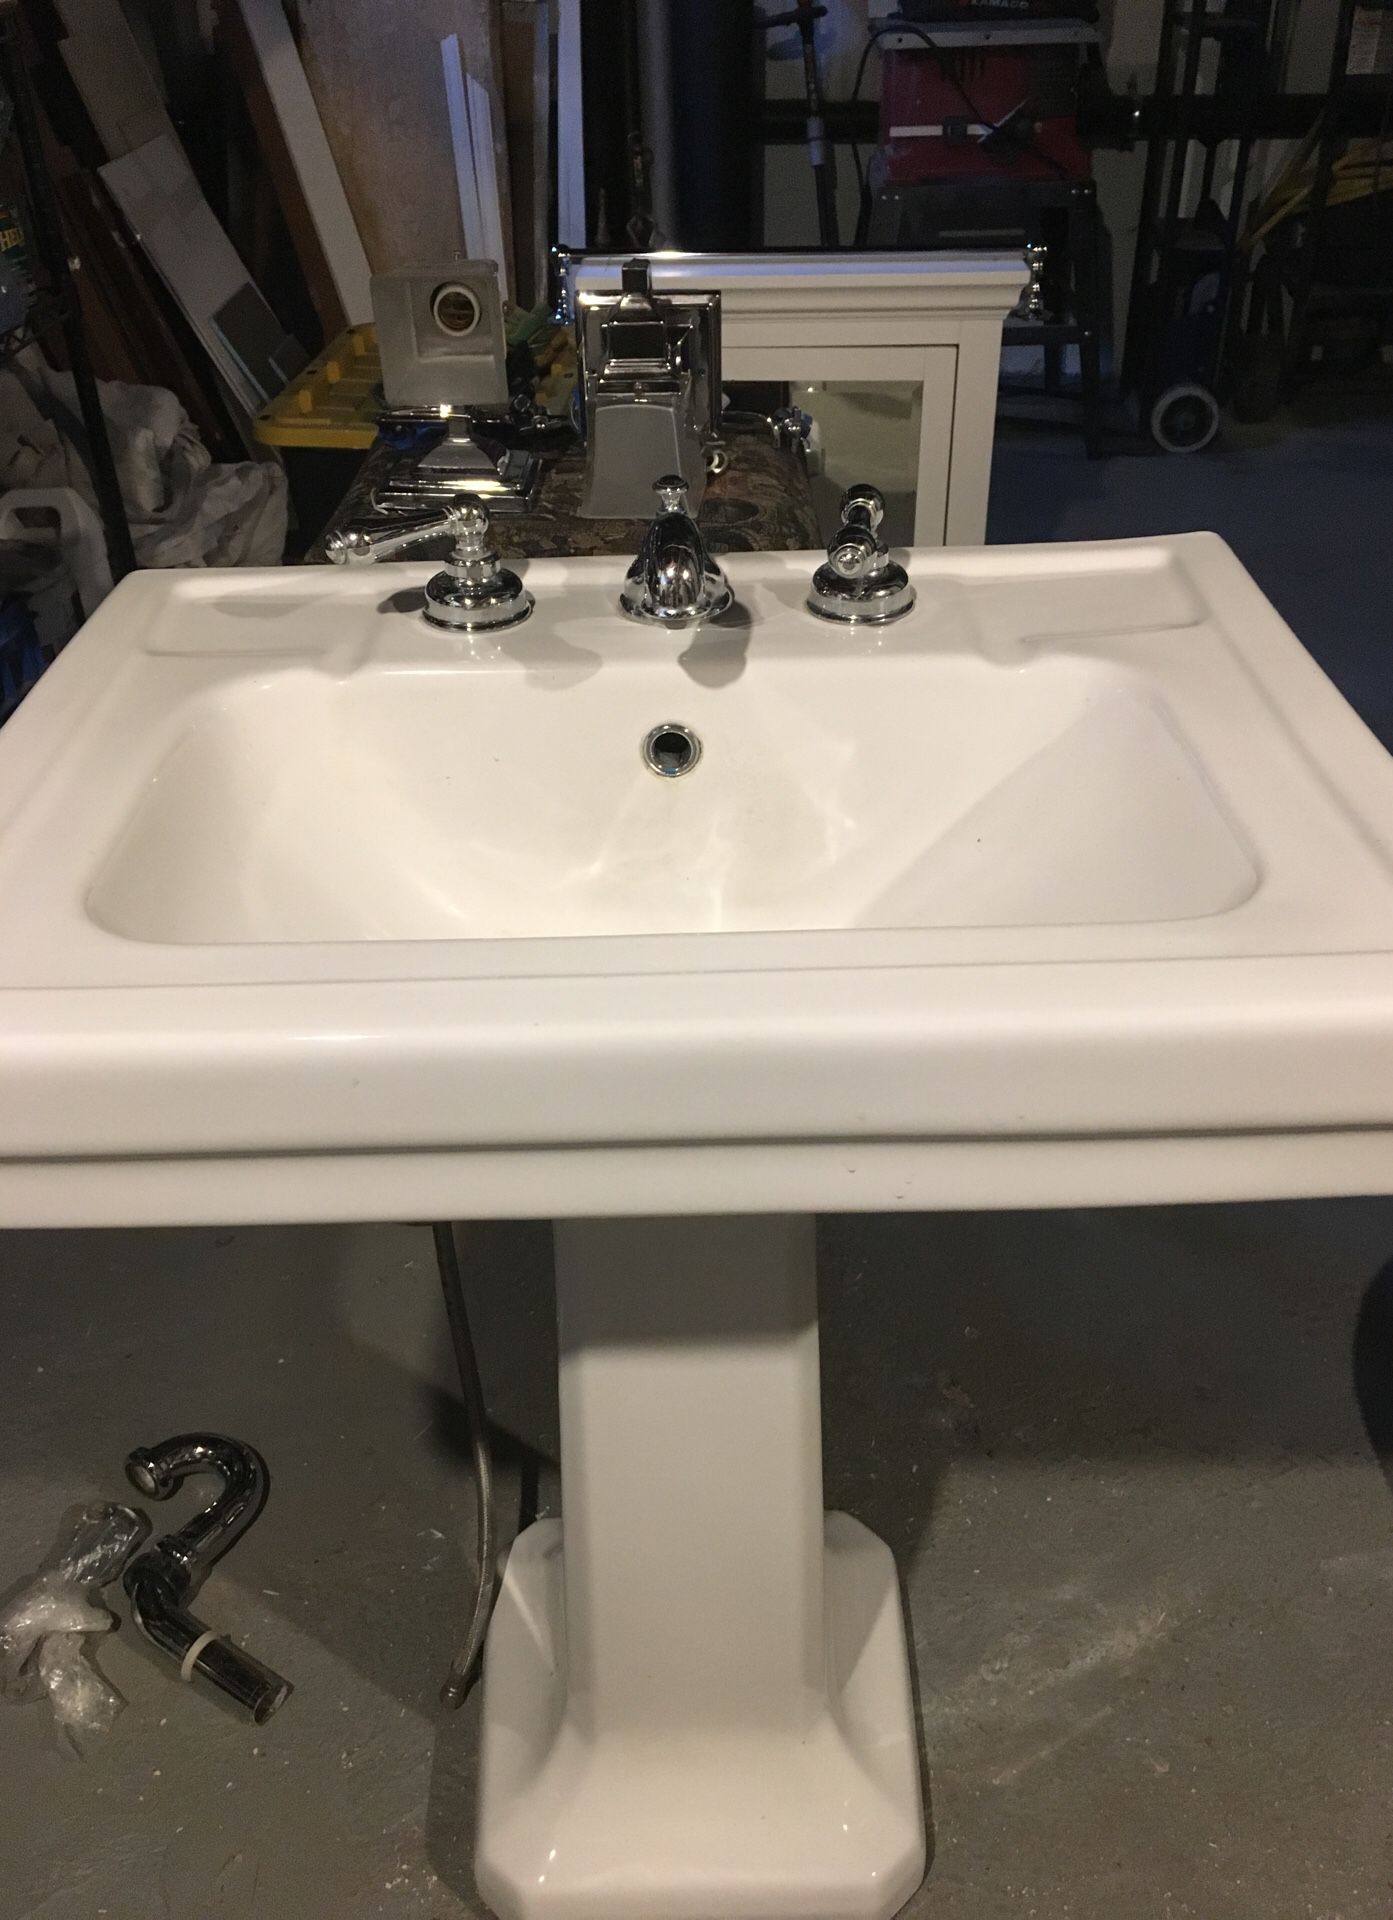 Bathroom sink and accessories